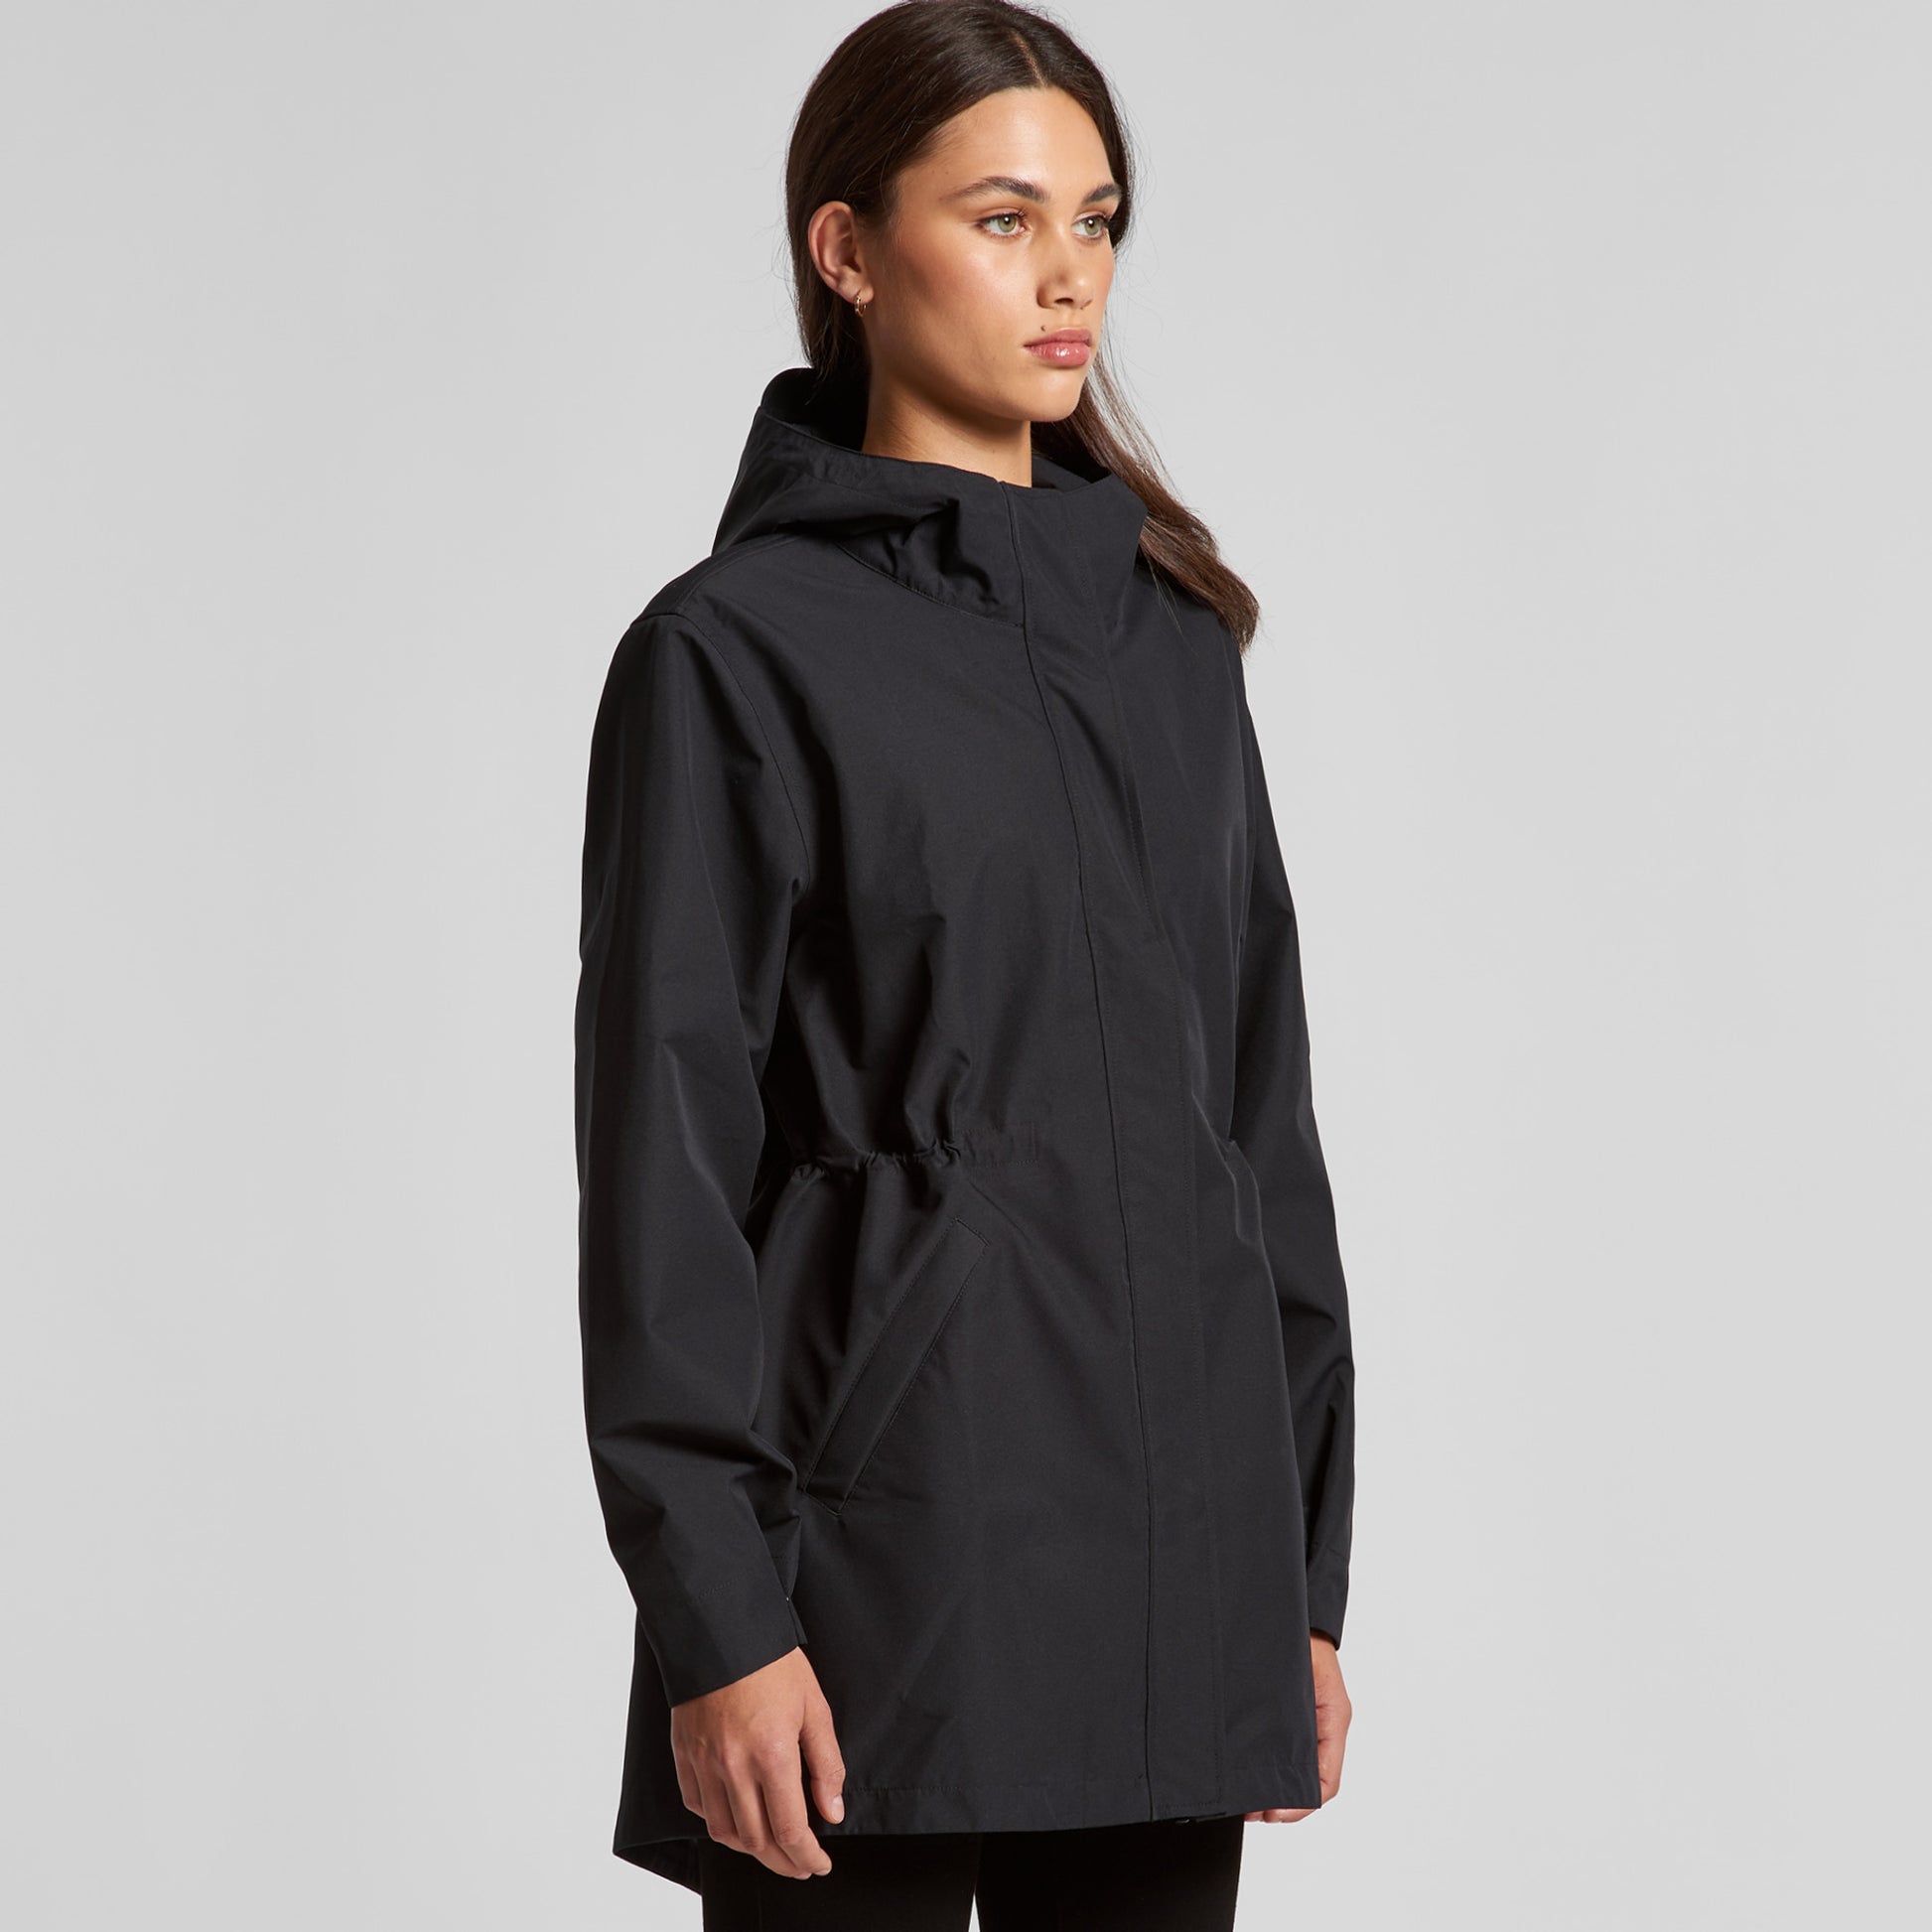 Womens Tech Jacket | Recycled Polyester AS Colour